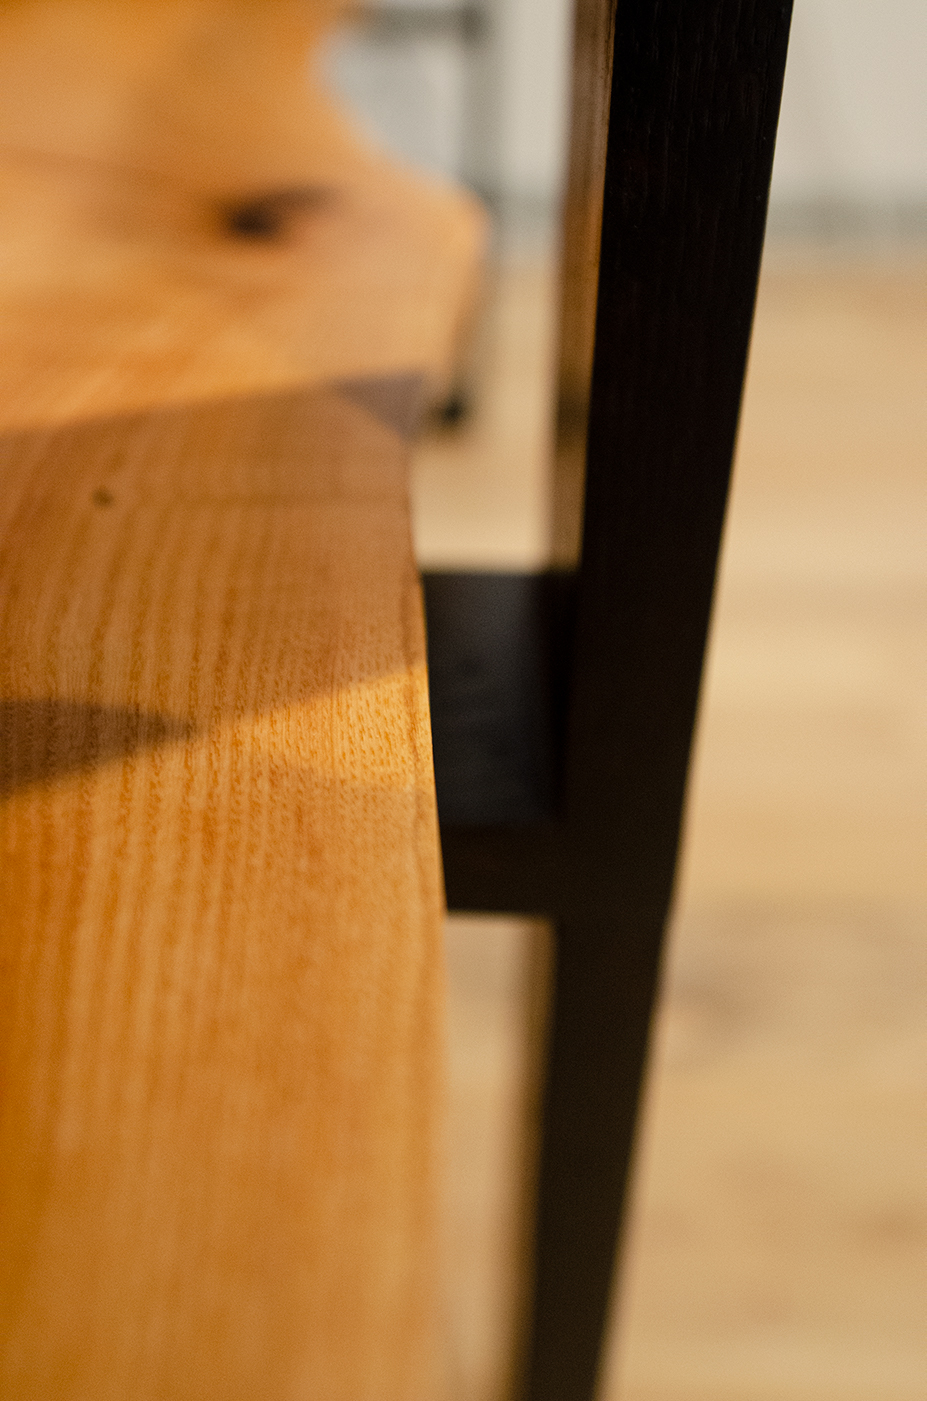 Sofa back table detailing the contrast between the live edge slab and the black sharp legs